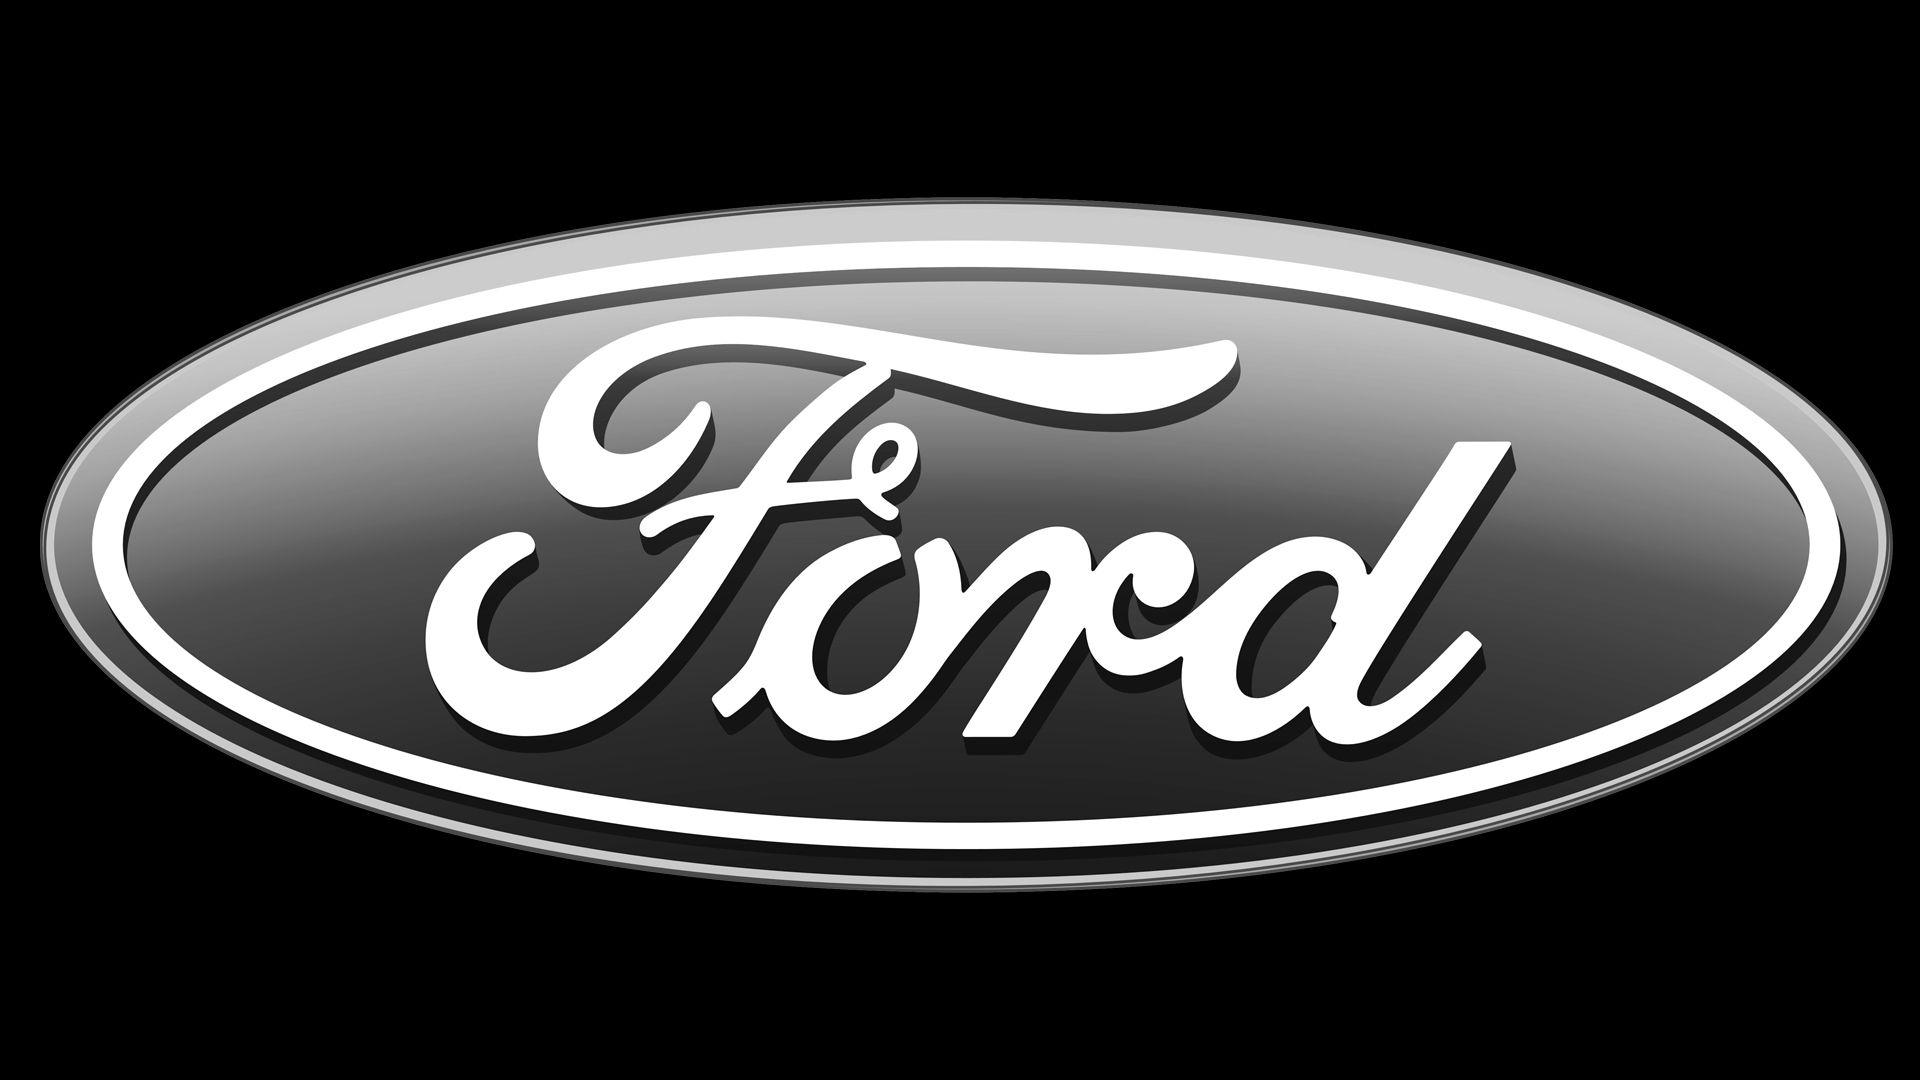 First Ford Logo - Ford Logo, Ford Symbol, Meaning, History and Evolution